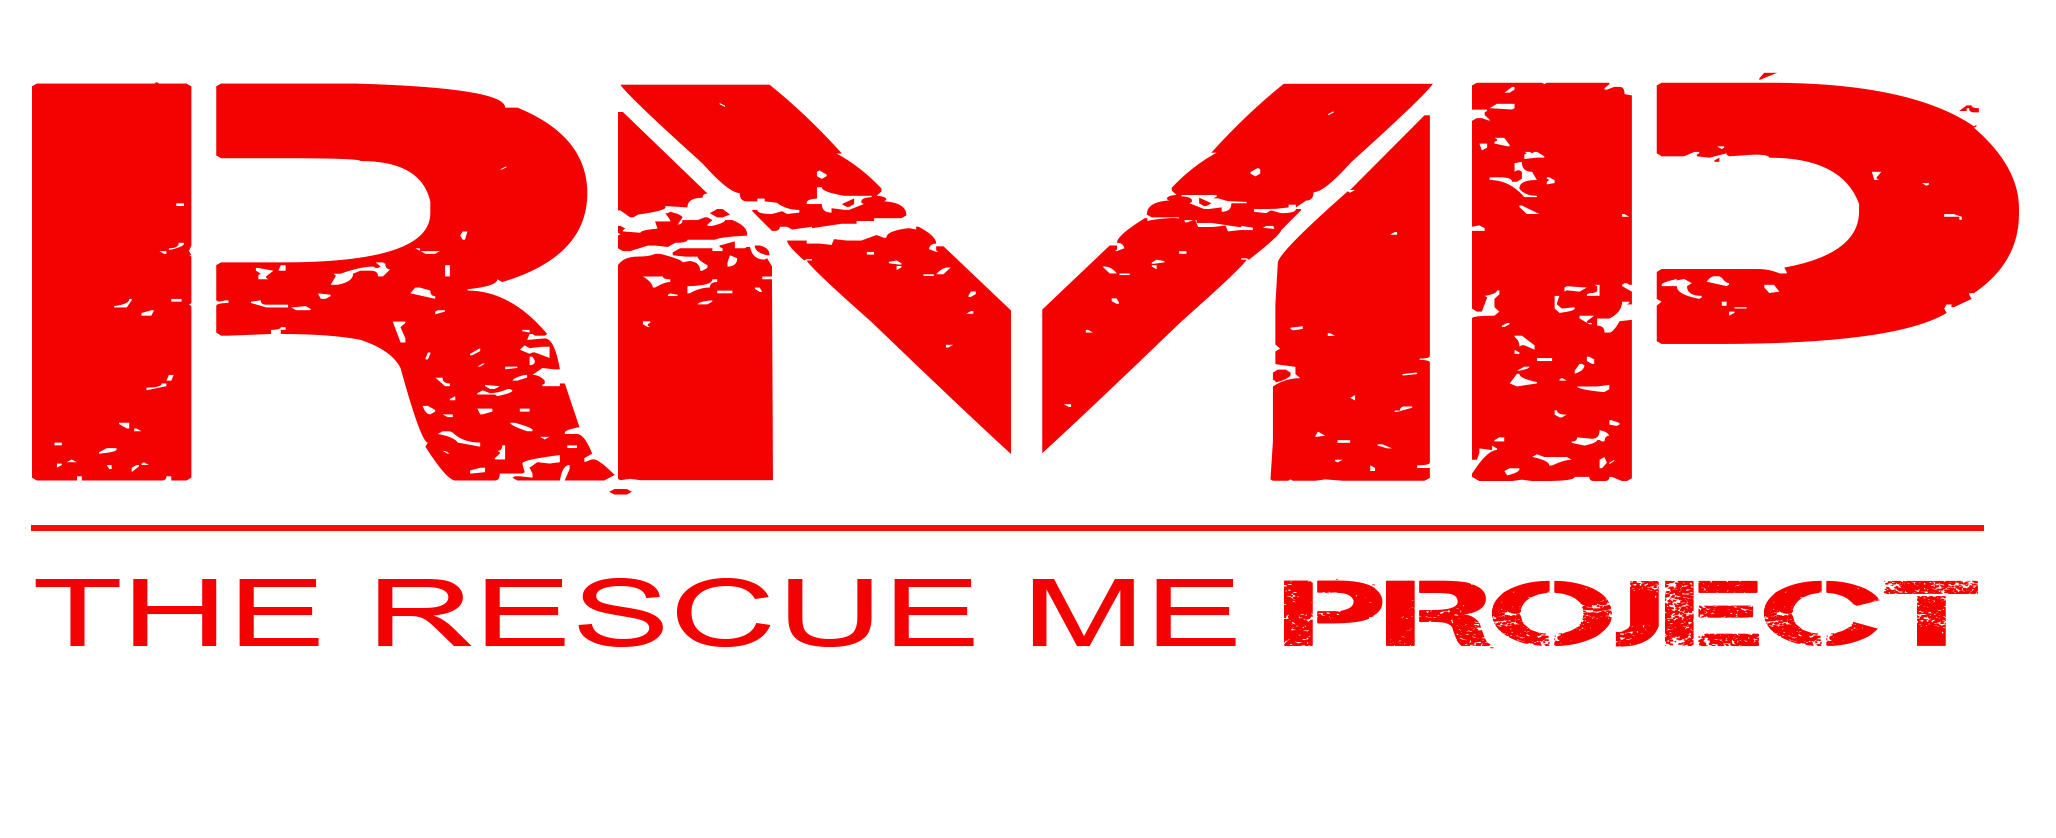 The Rescue Me Project logo